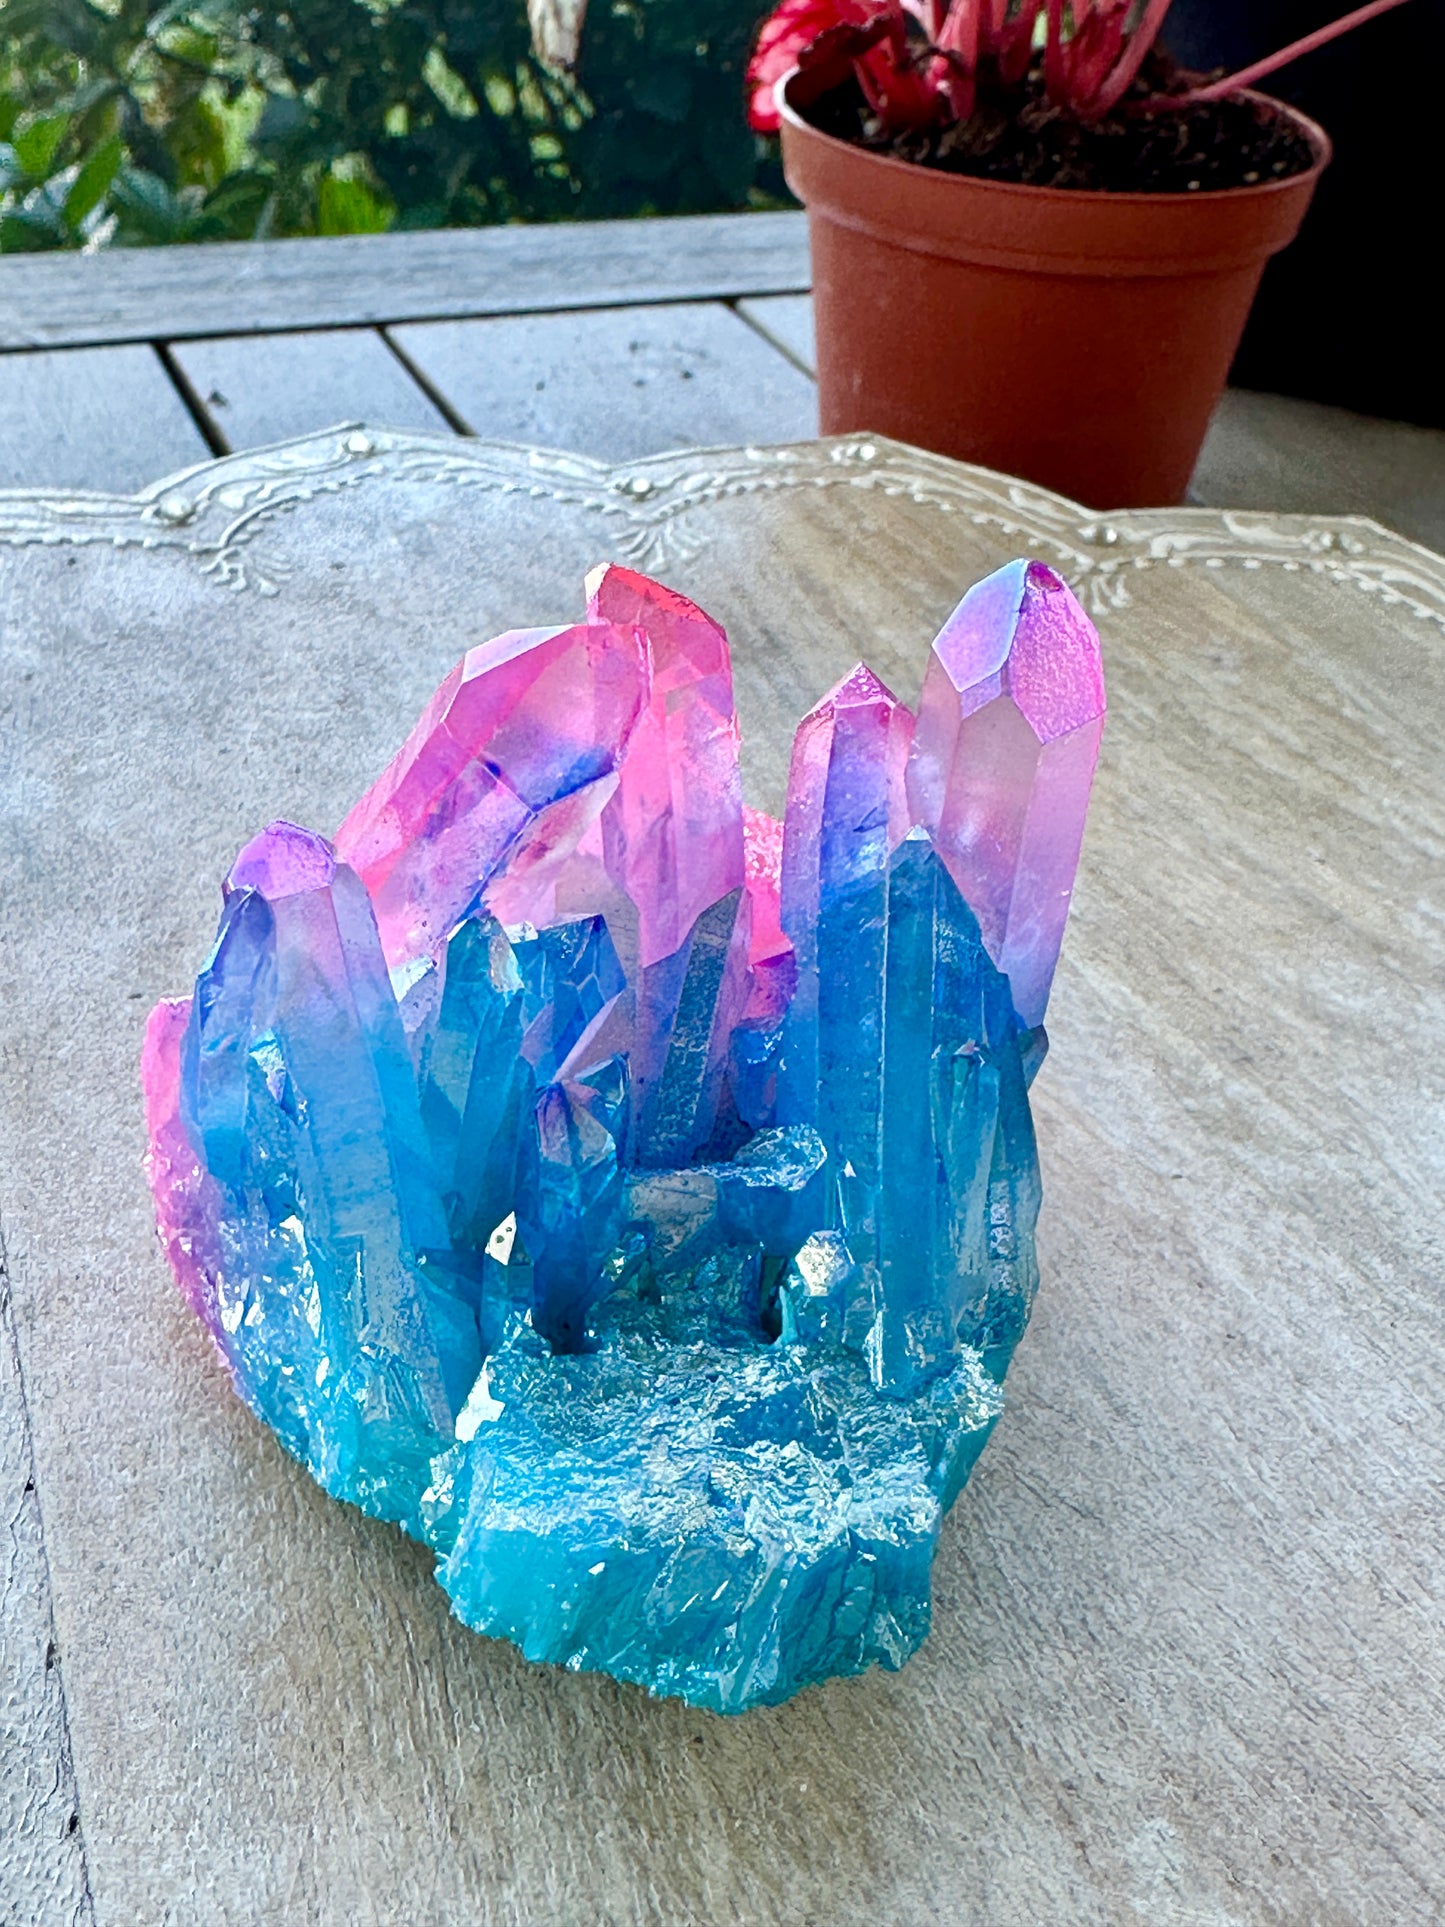 Radiant Aura Quartz Cluster - A Dazzling Display of Color and Energy, Ideal for Healing, Meditation, and Home Decor